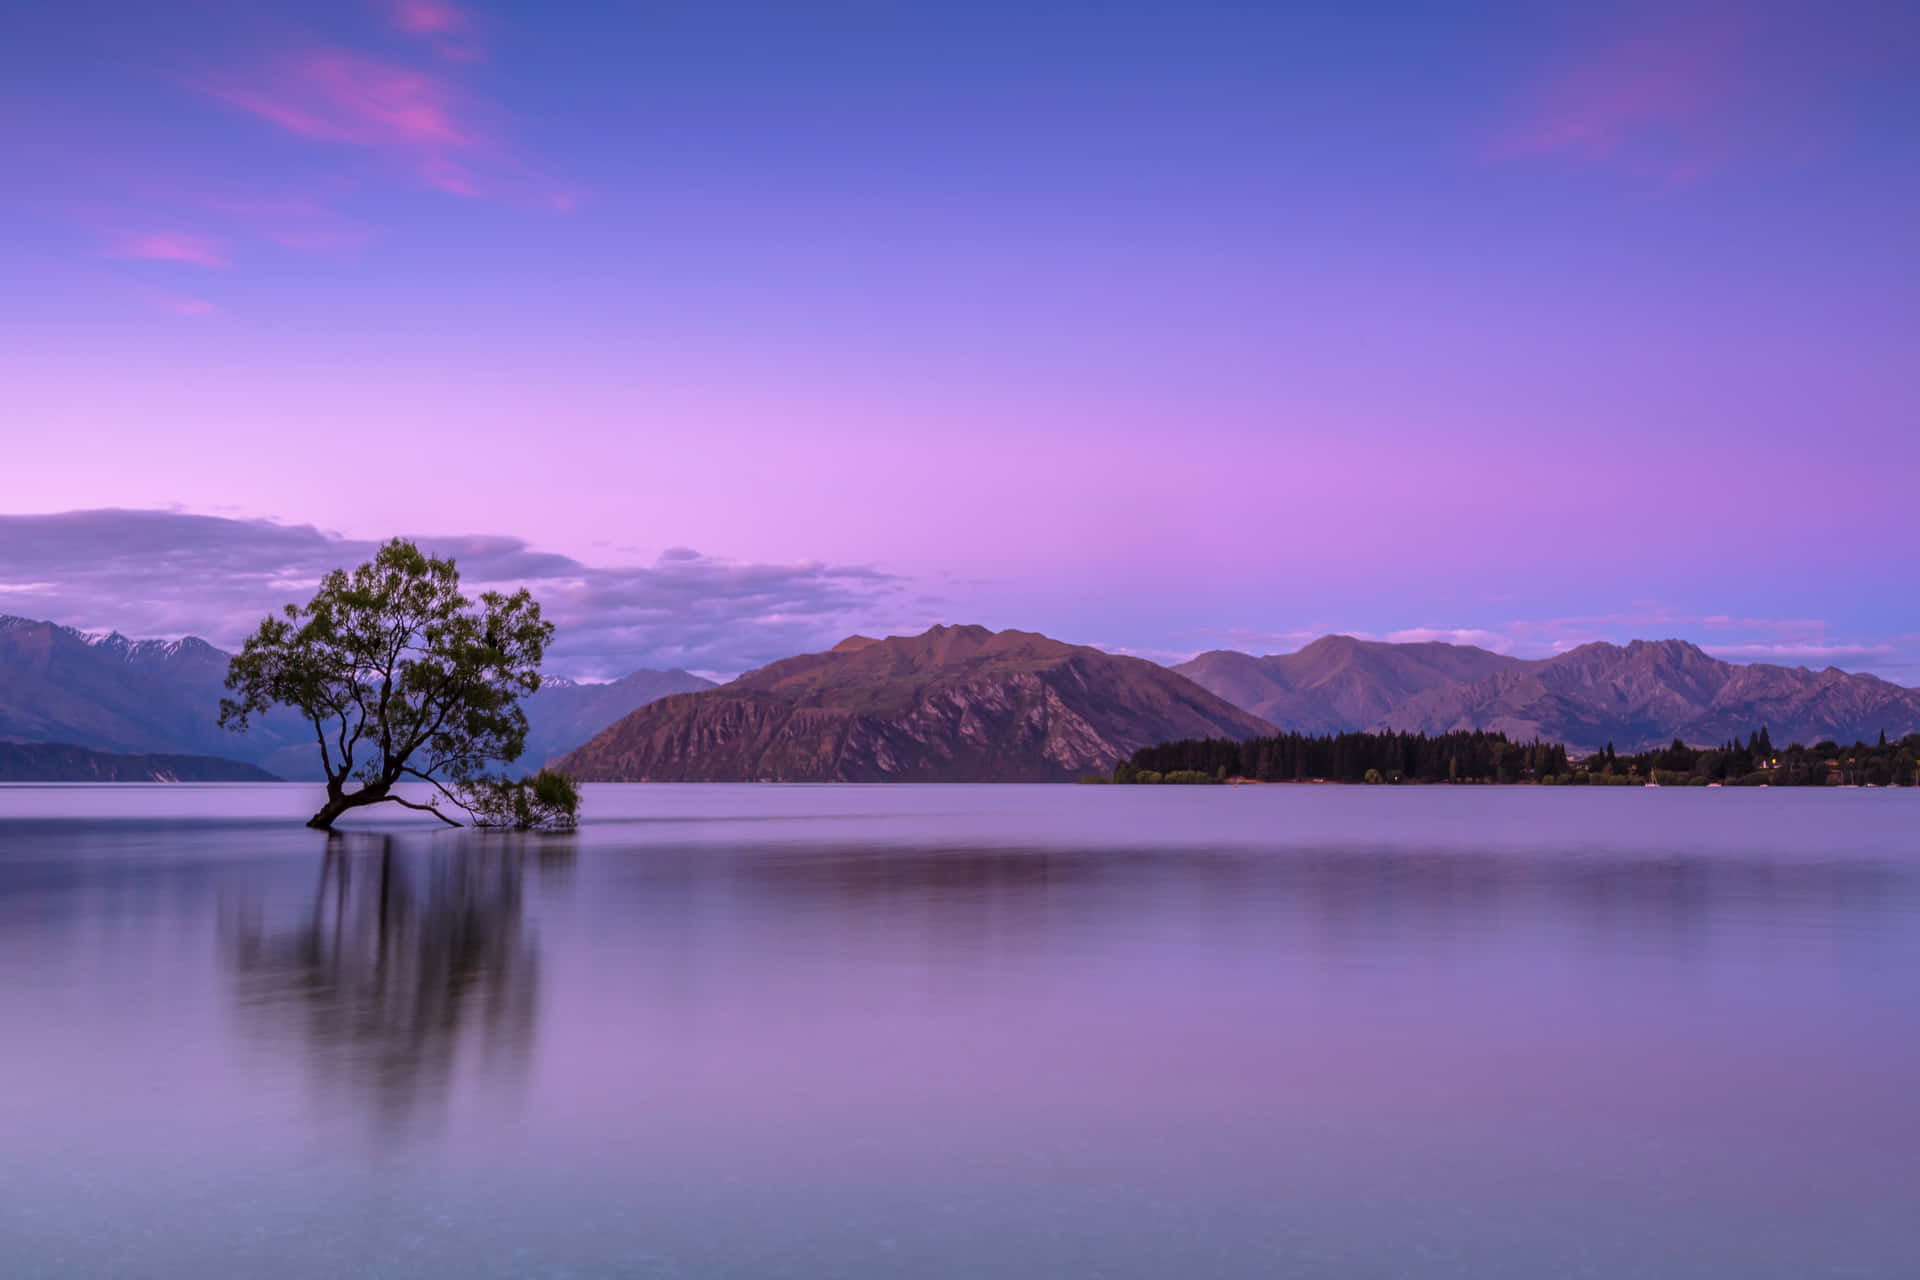 A Lone Tree In A Lake